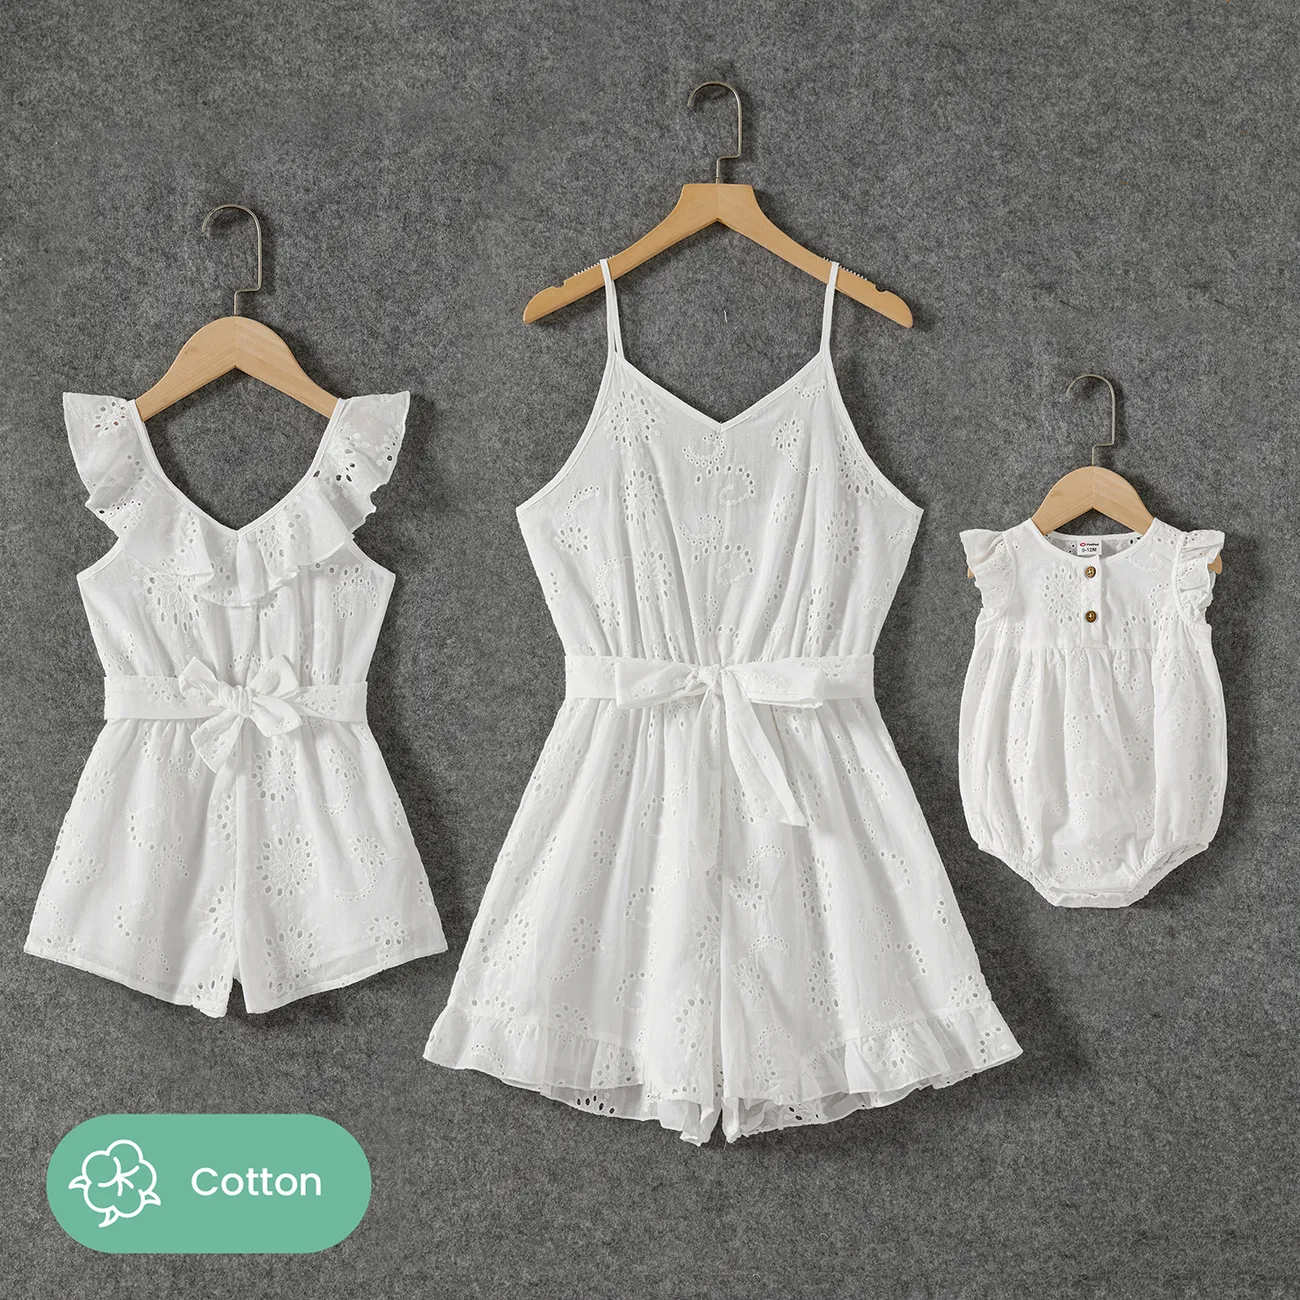 Mommy and Me 100% Cotton White Ruffle Trim Sleeveless Belted Rompers White big image 1